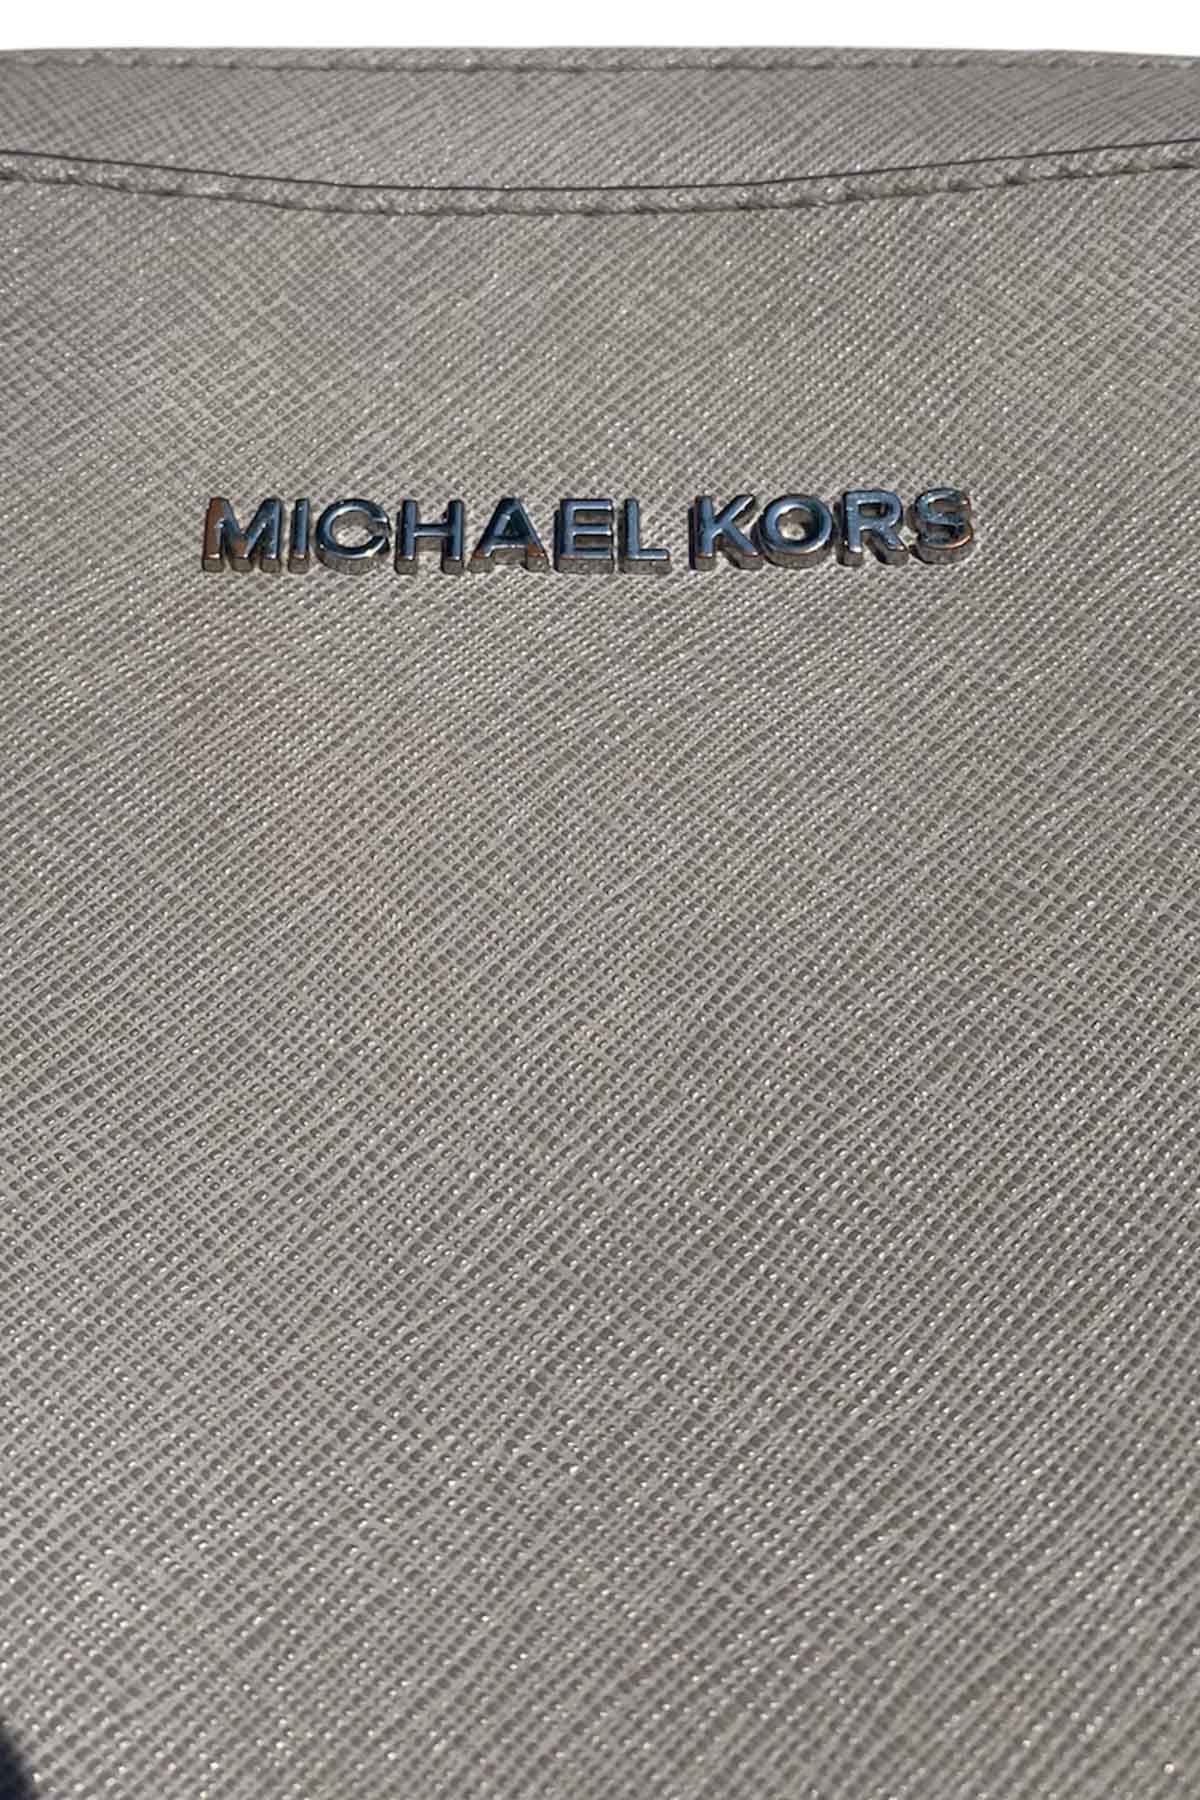 close up of the front of a michael kors purse.